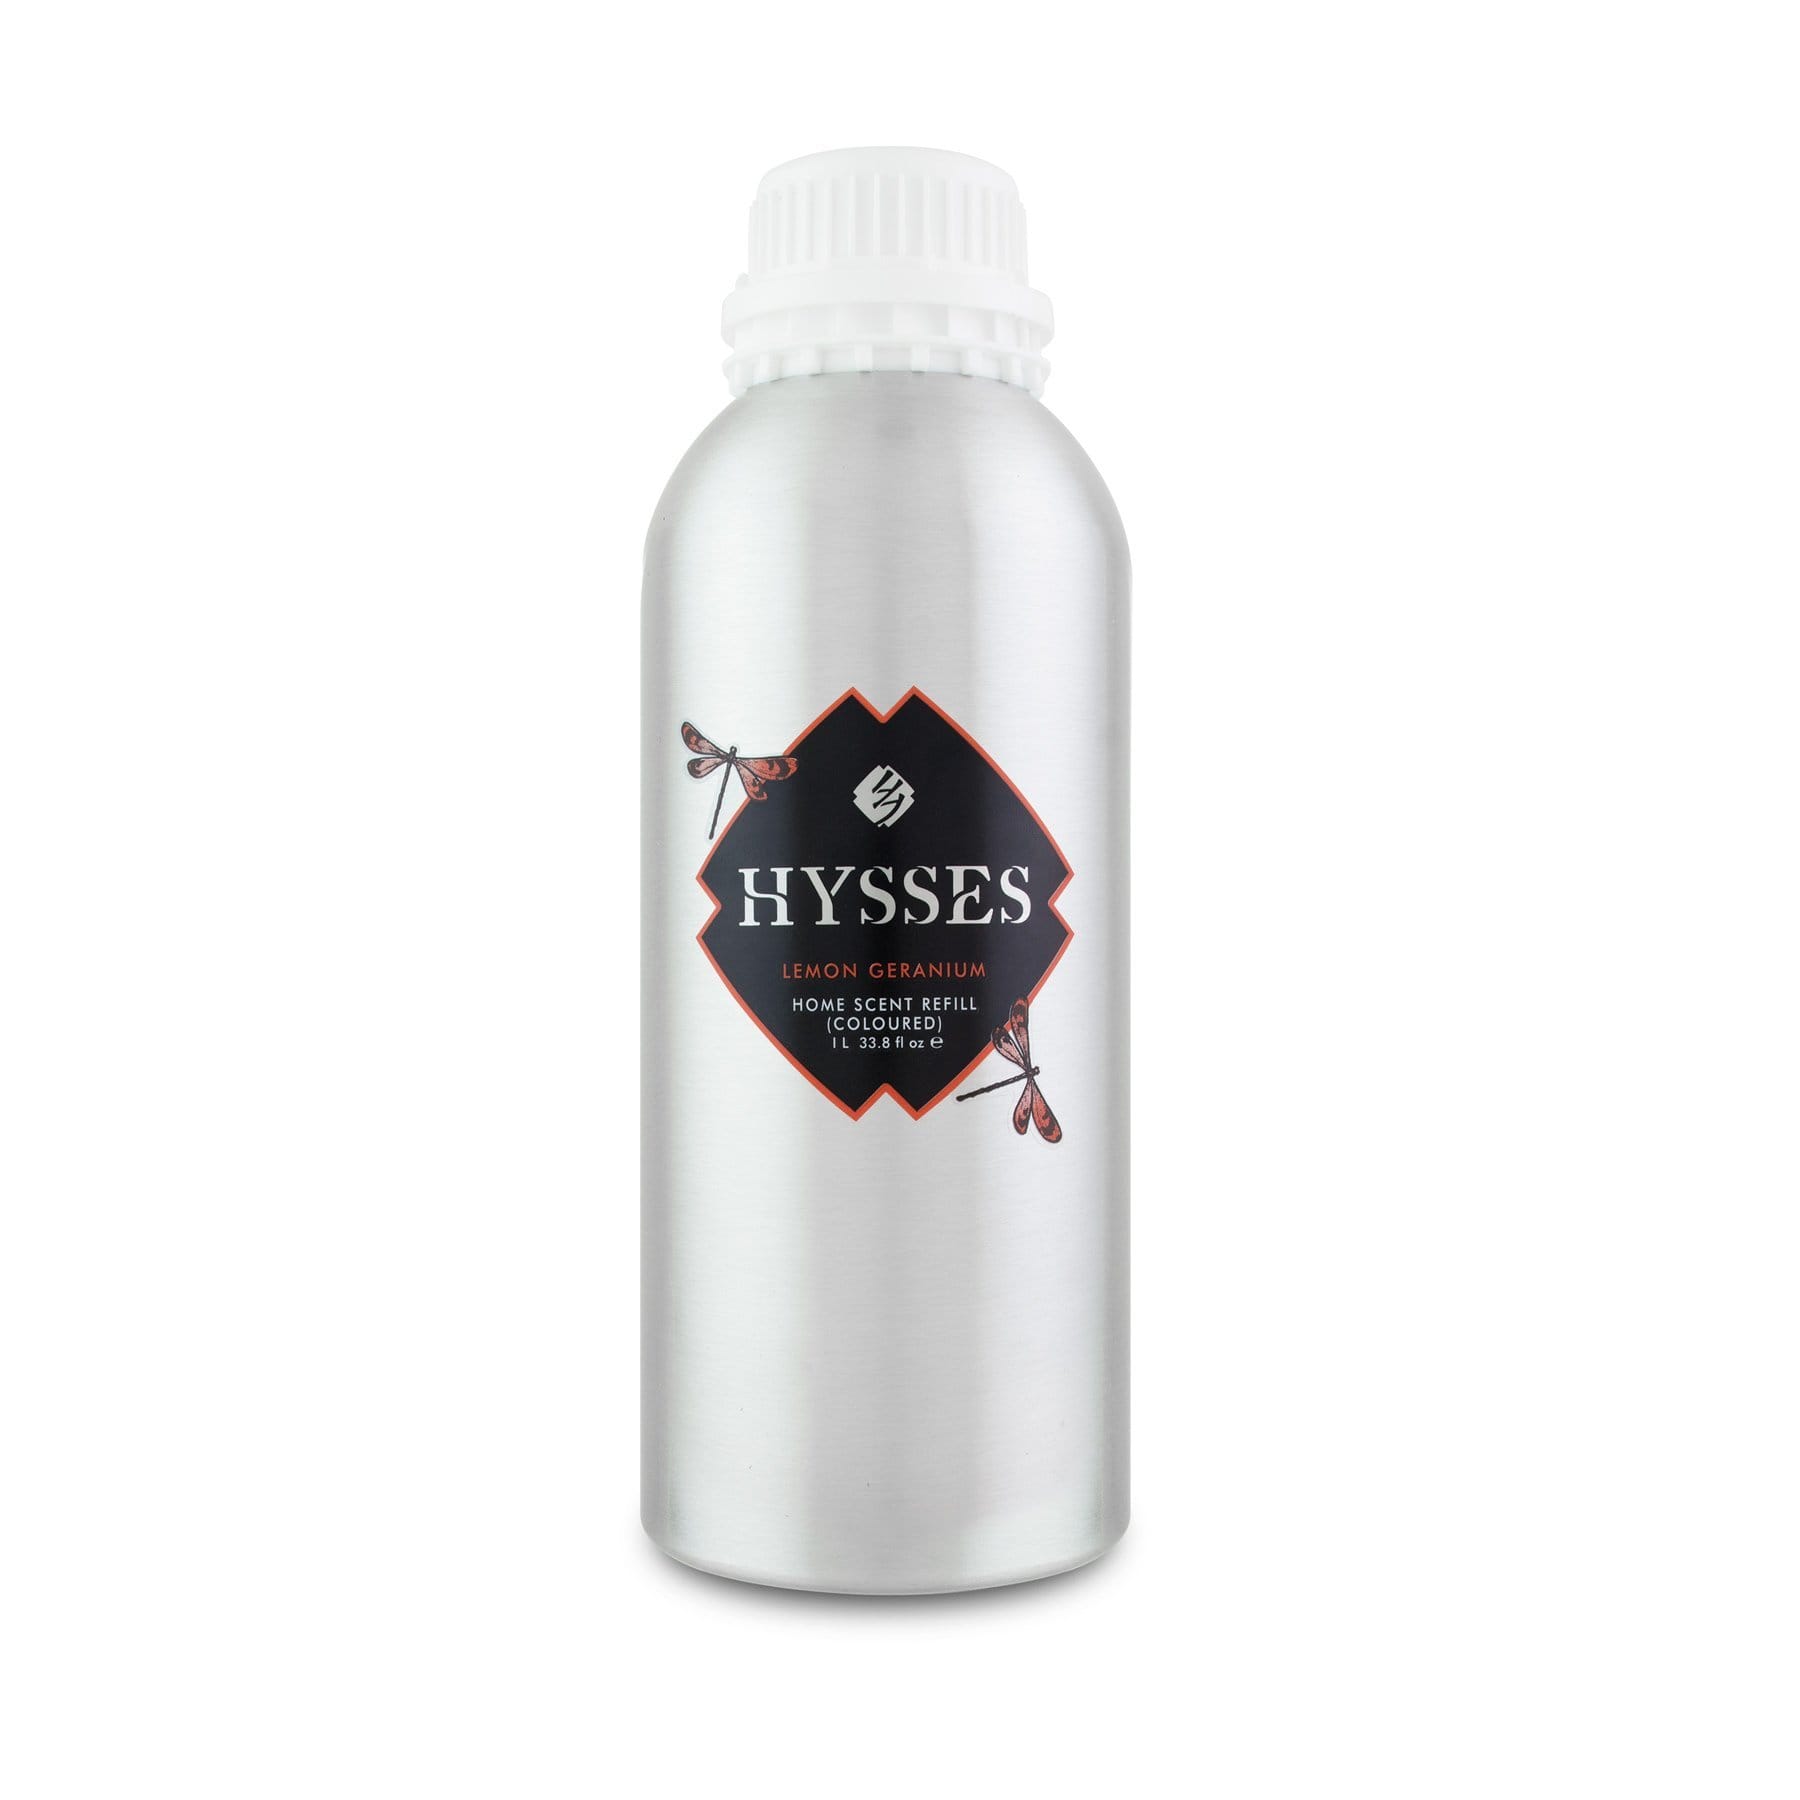 Hysses Home Scents 500ml Refill Home Scent  Lemon Geranium (Red Coloured)